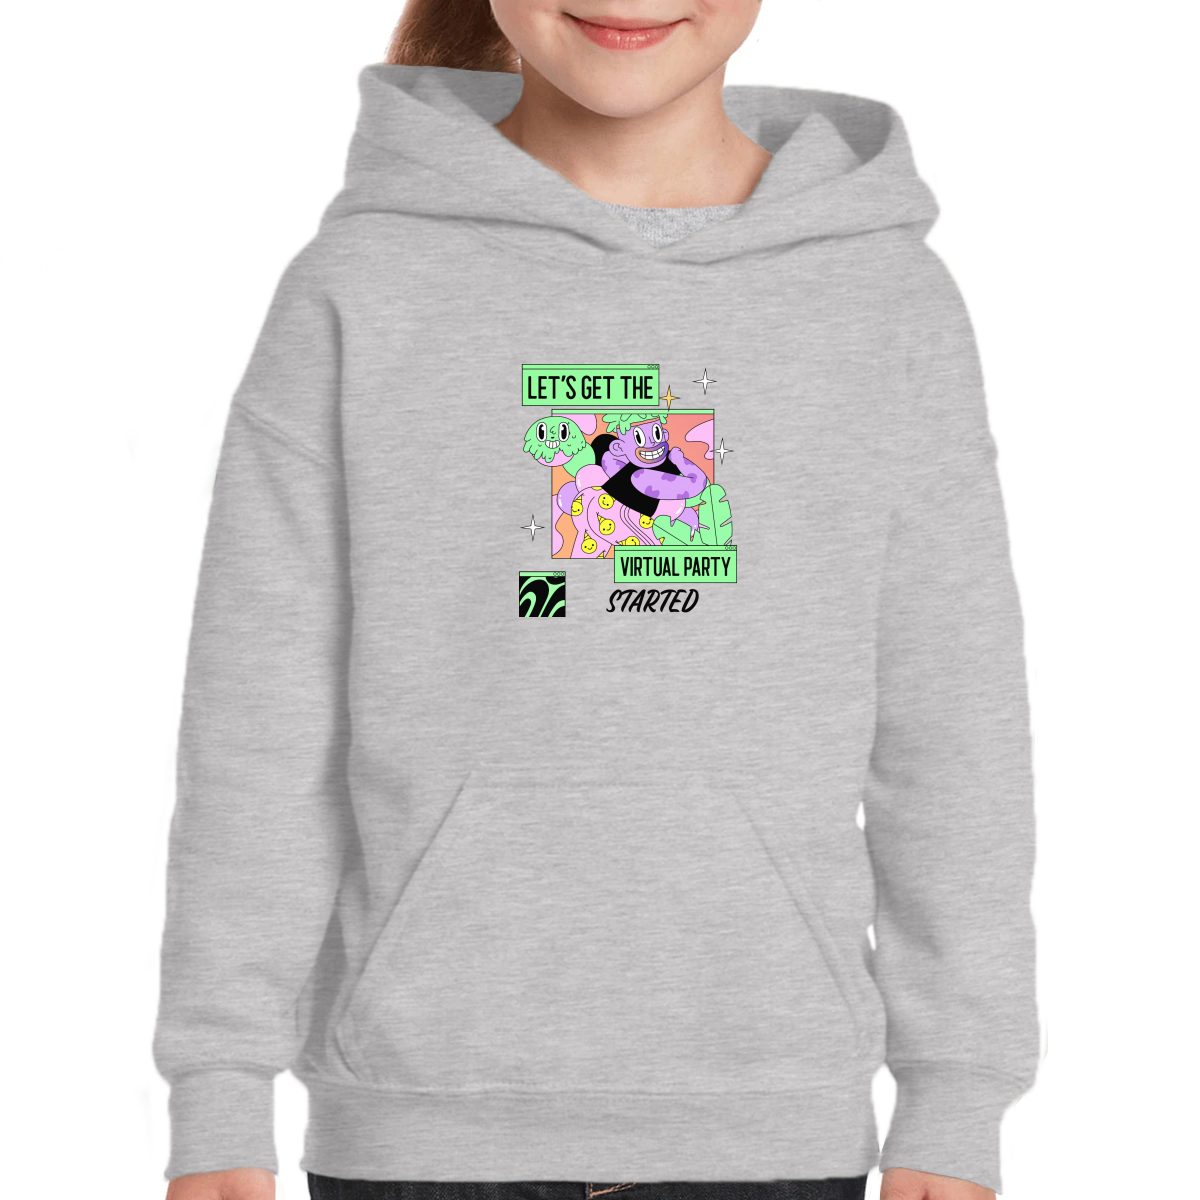 Let's get the virtual party started Kids Hoodie | Gray